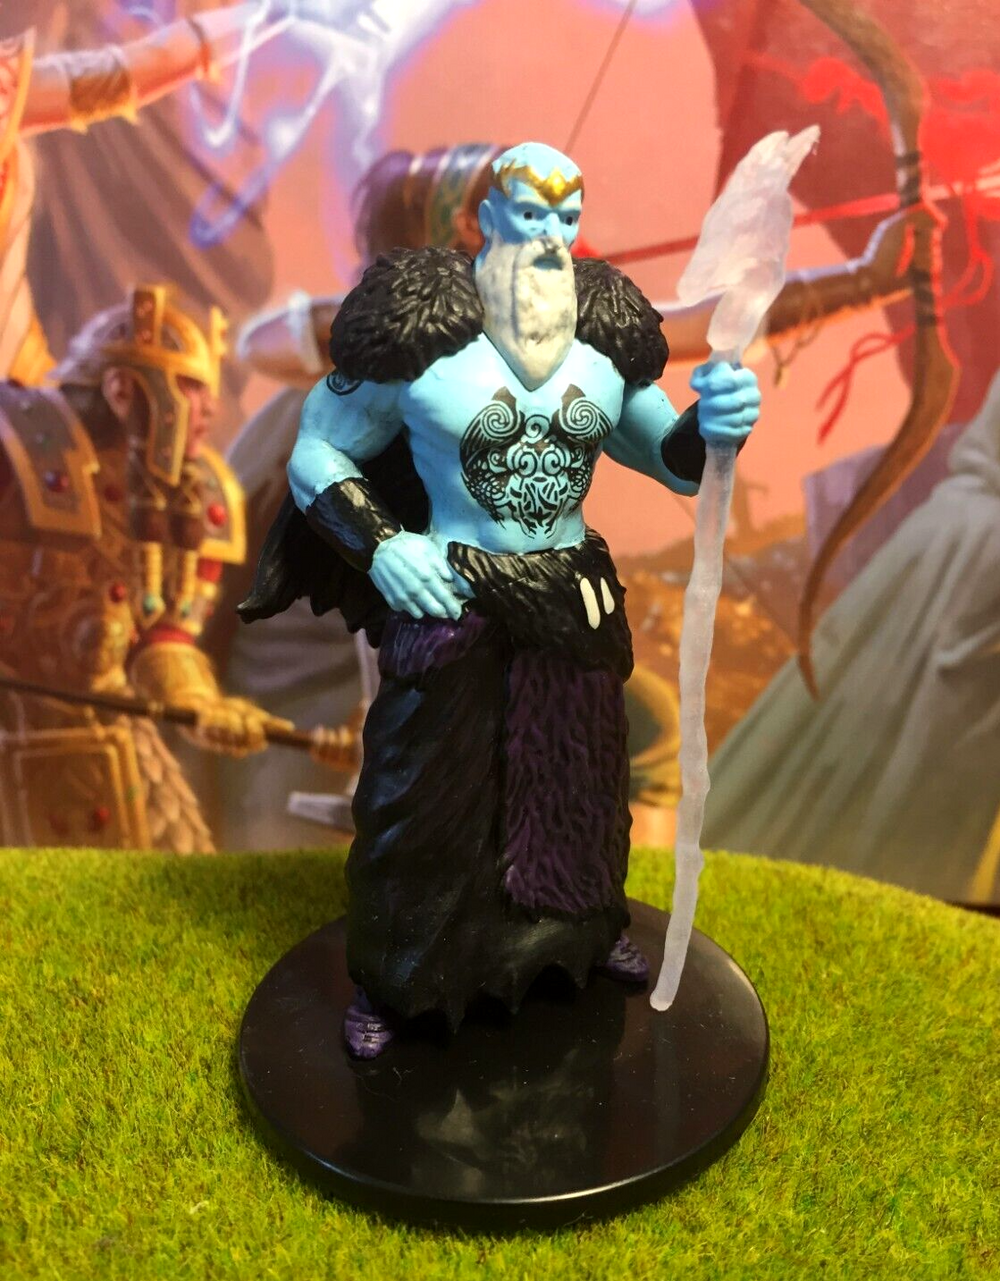 Frost Giant Ice Mage D&D Miniature Dungeons Dragons Rusty Inn wizard large 28 Z